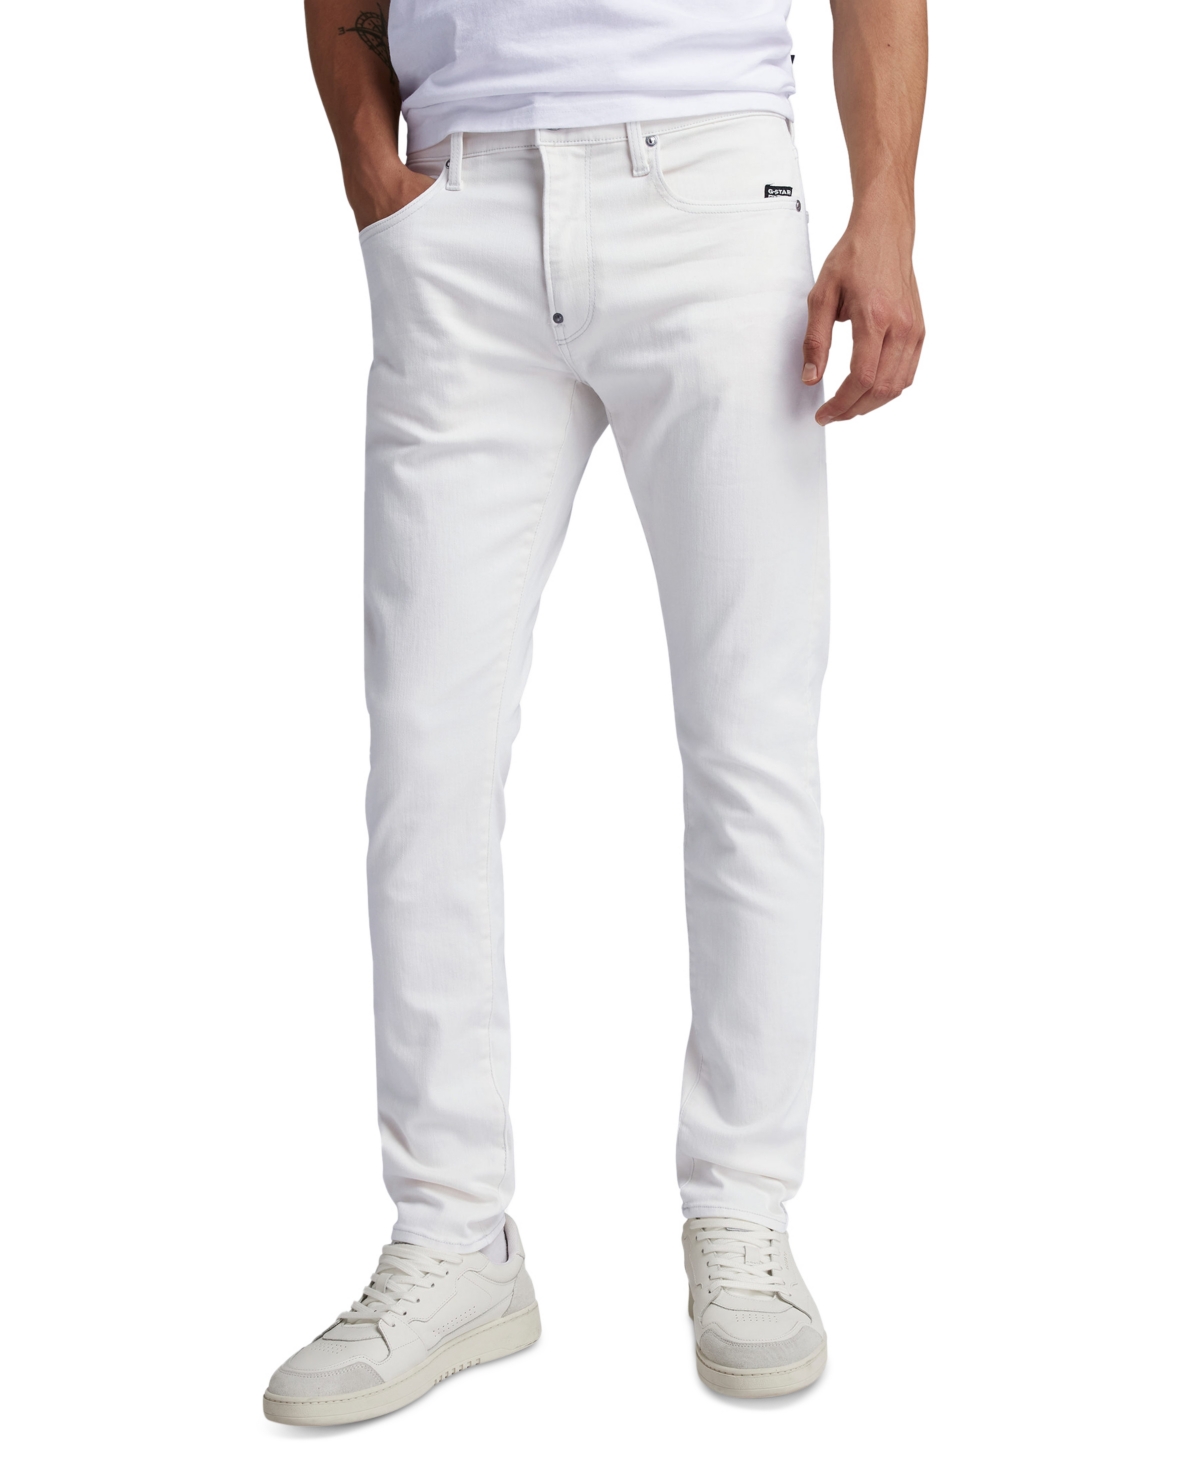 G-star Raw Men's Skinny-fit Jeans In Paper White Gd